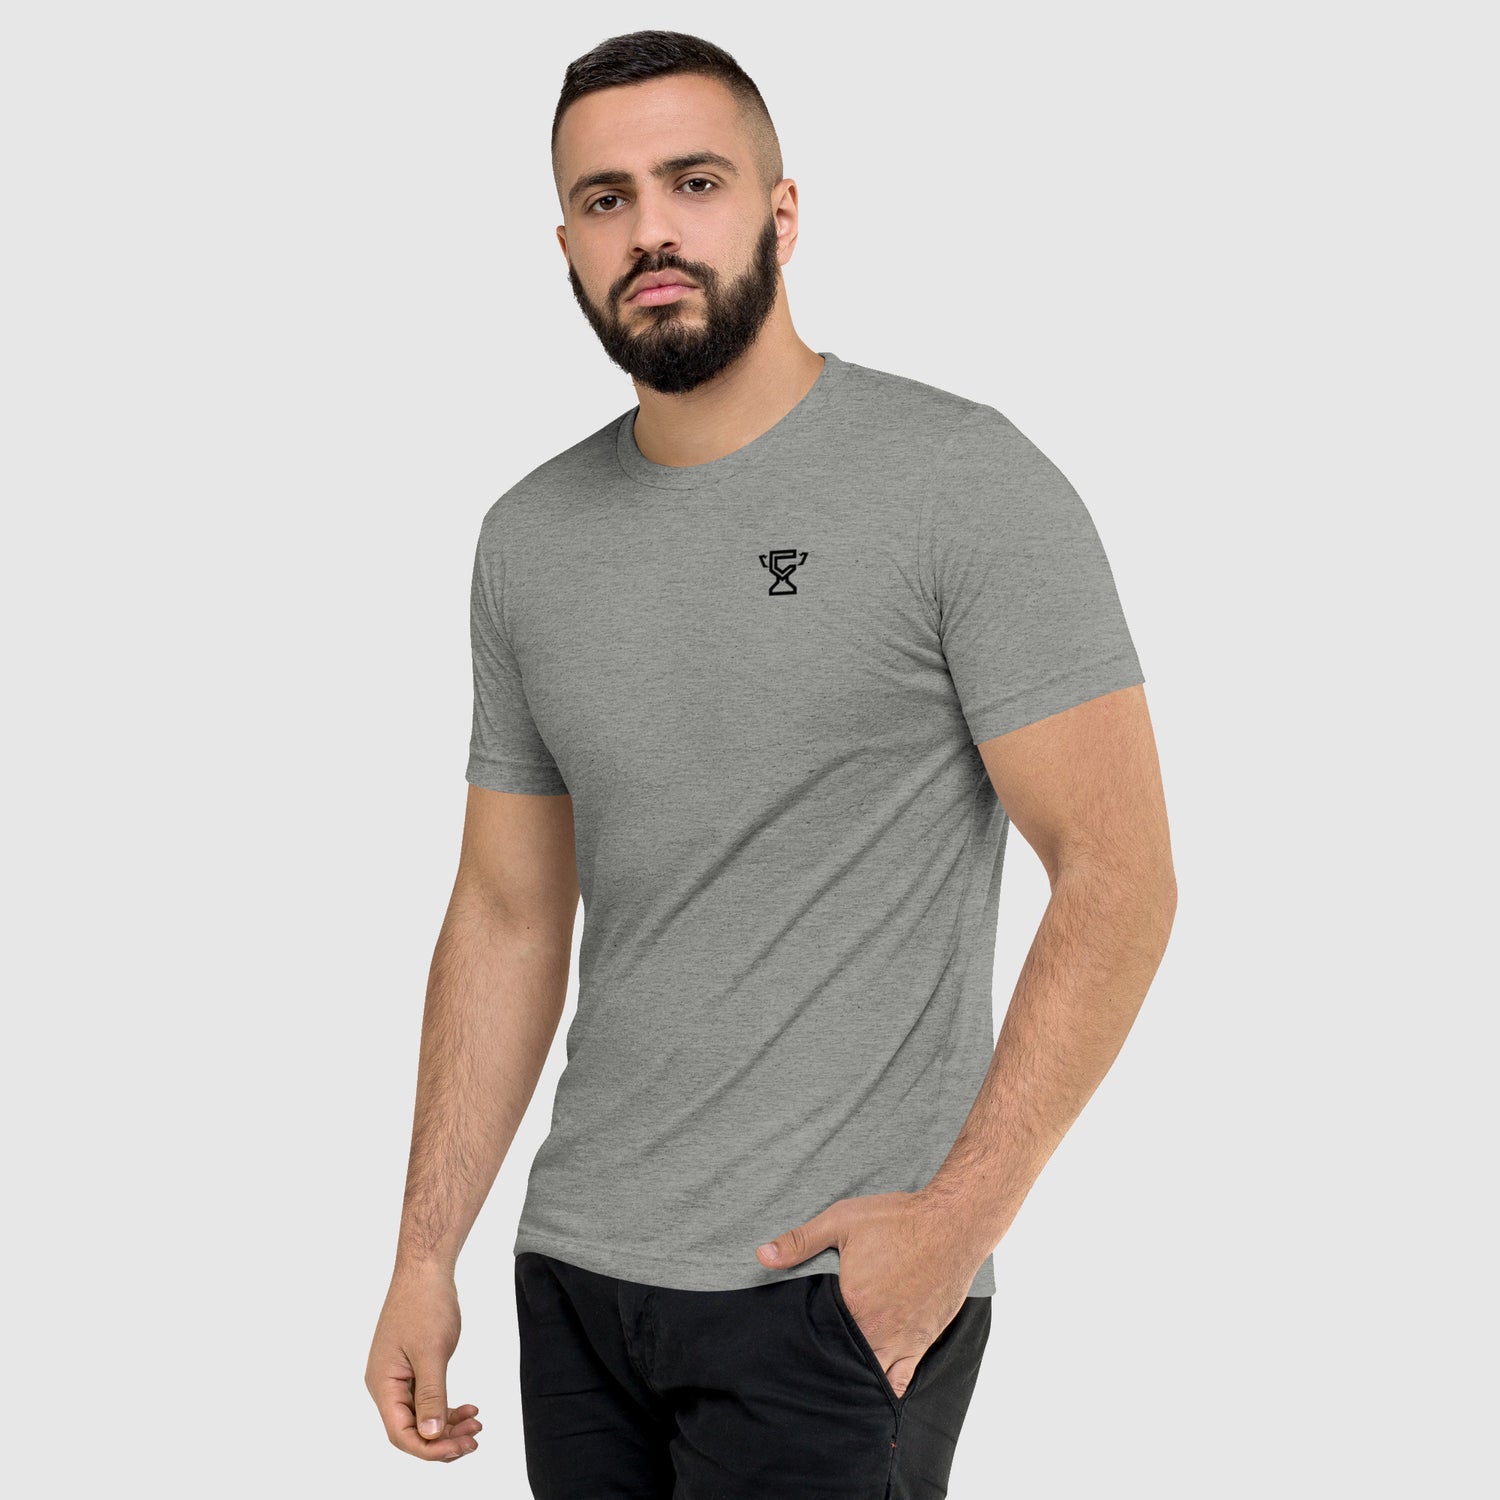 Athlete wearing the sport gray trophy tee, front view.